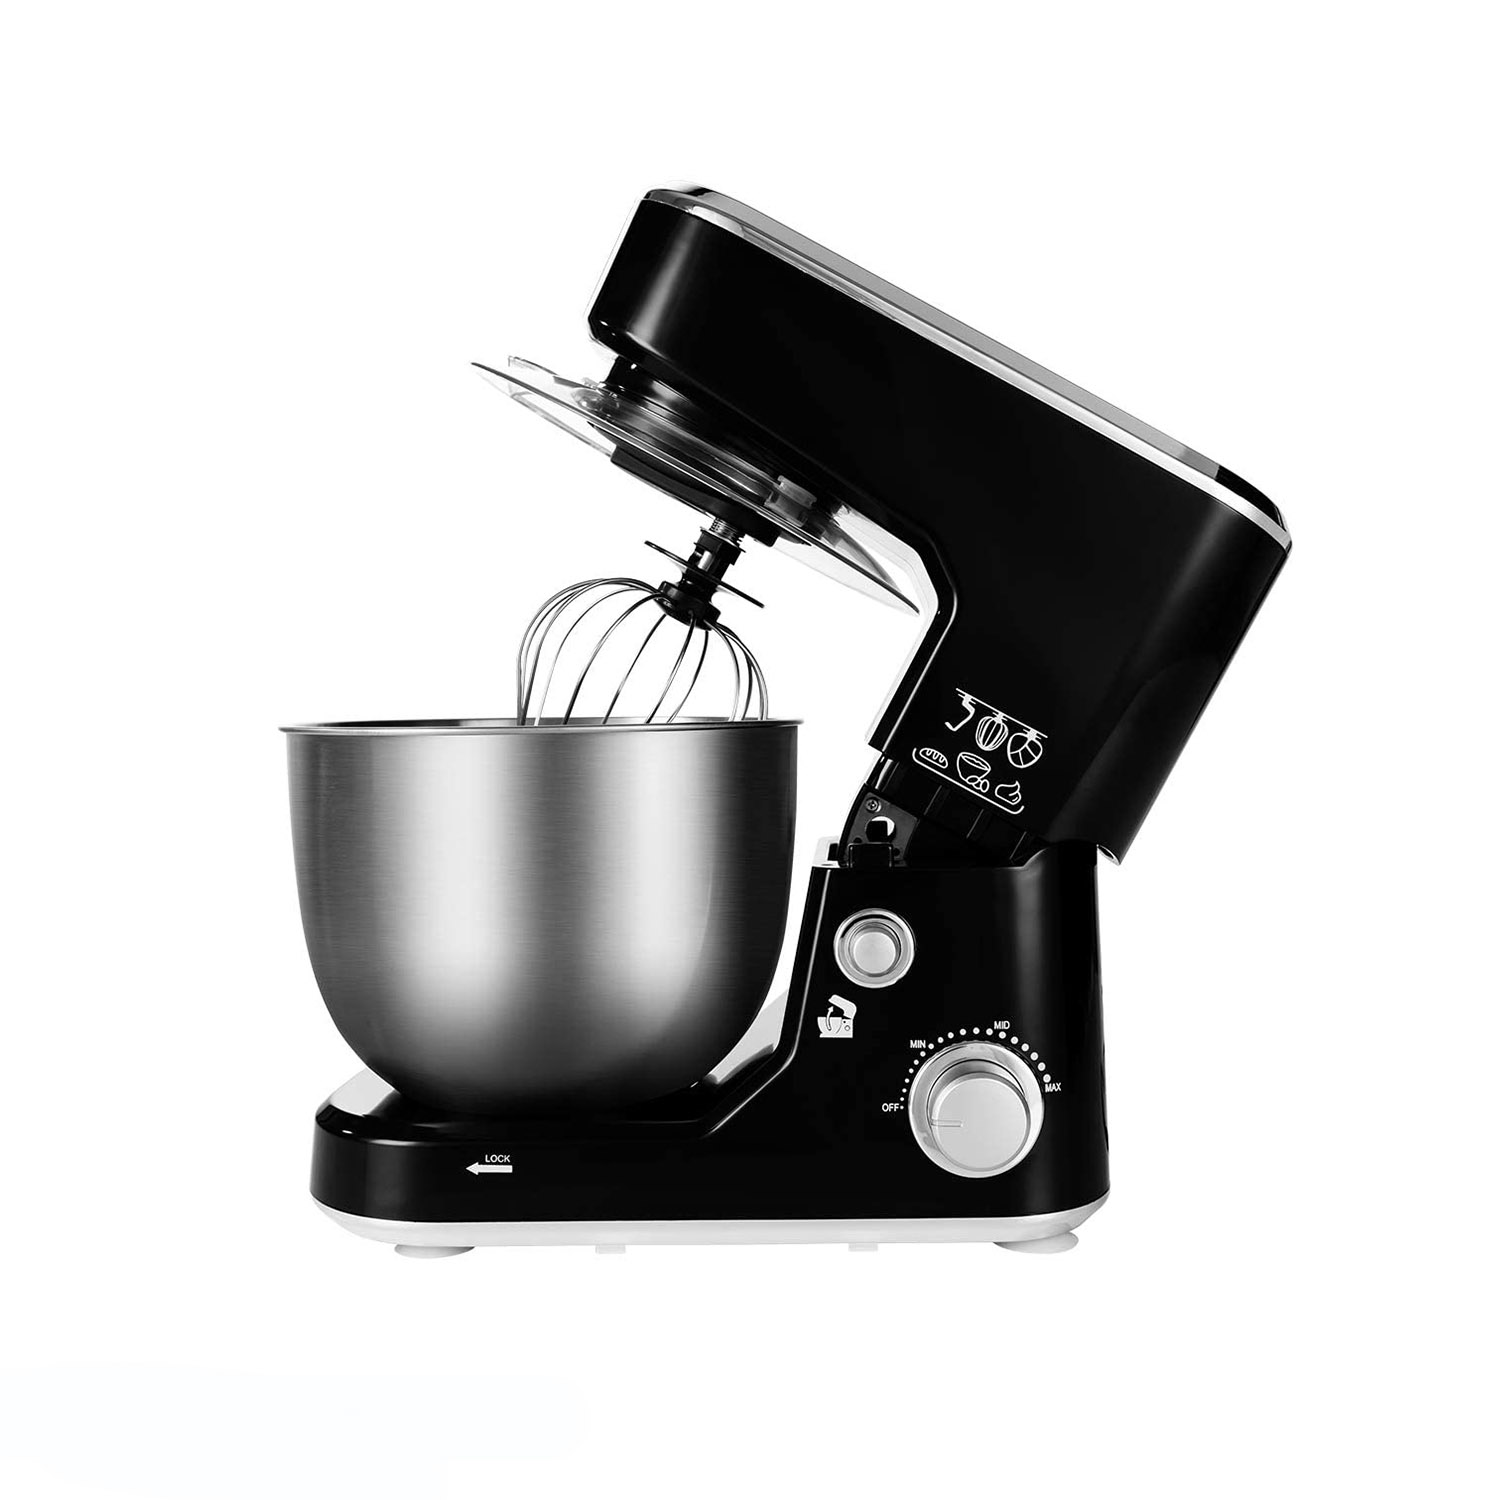 Cusimax Tilt head Stand Mixer,5QT Electric Food Mixer with Stainless Steel Bowl,Dough Hook, Mixing Beater and Whisk, Splash Guard,Great For Daily Use